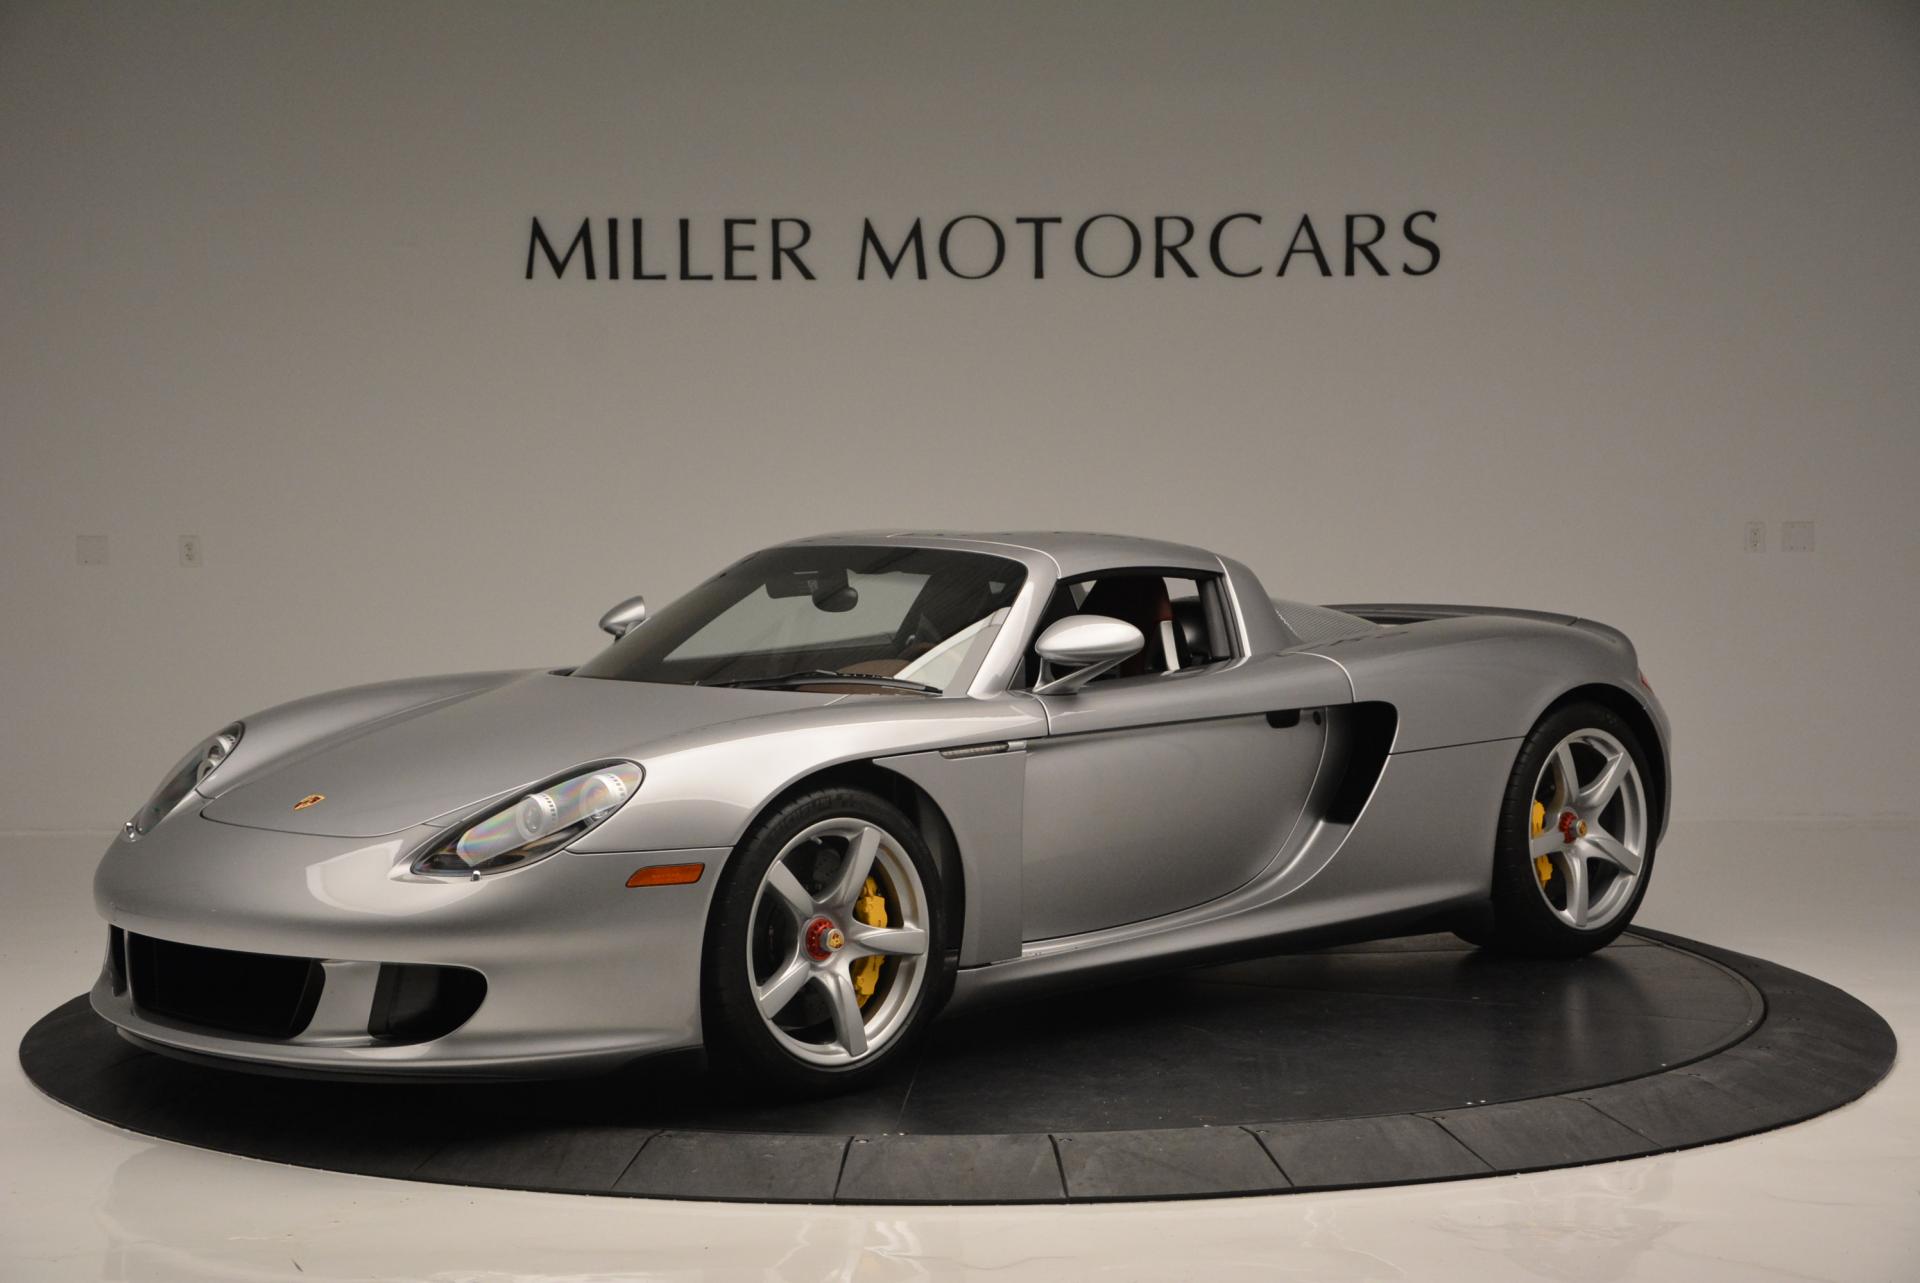 Used 2005 Porsche Carrera GT for sale Sold at Pagani of Greenwich in Greenwich CT 06830 1